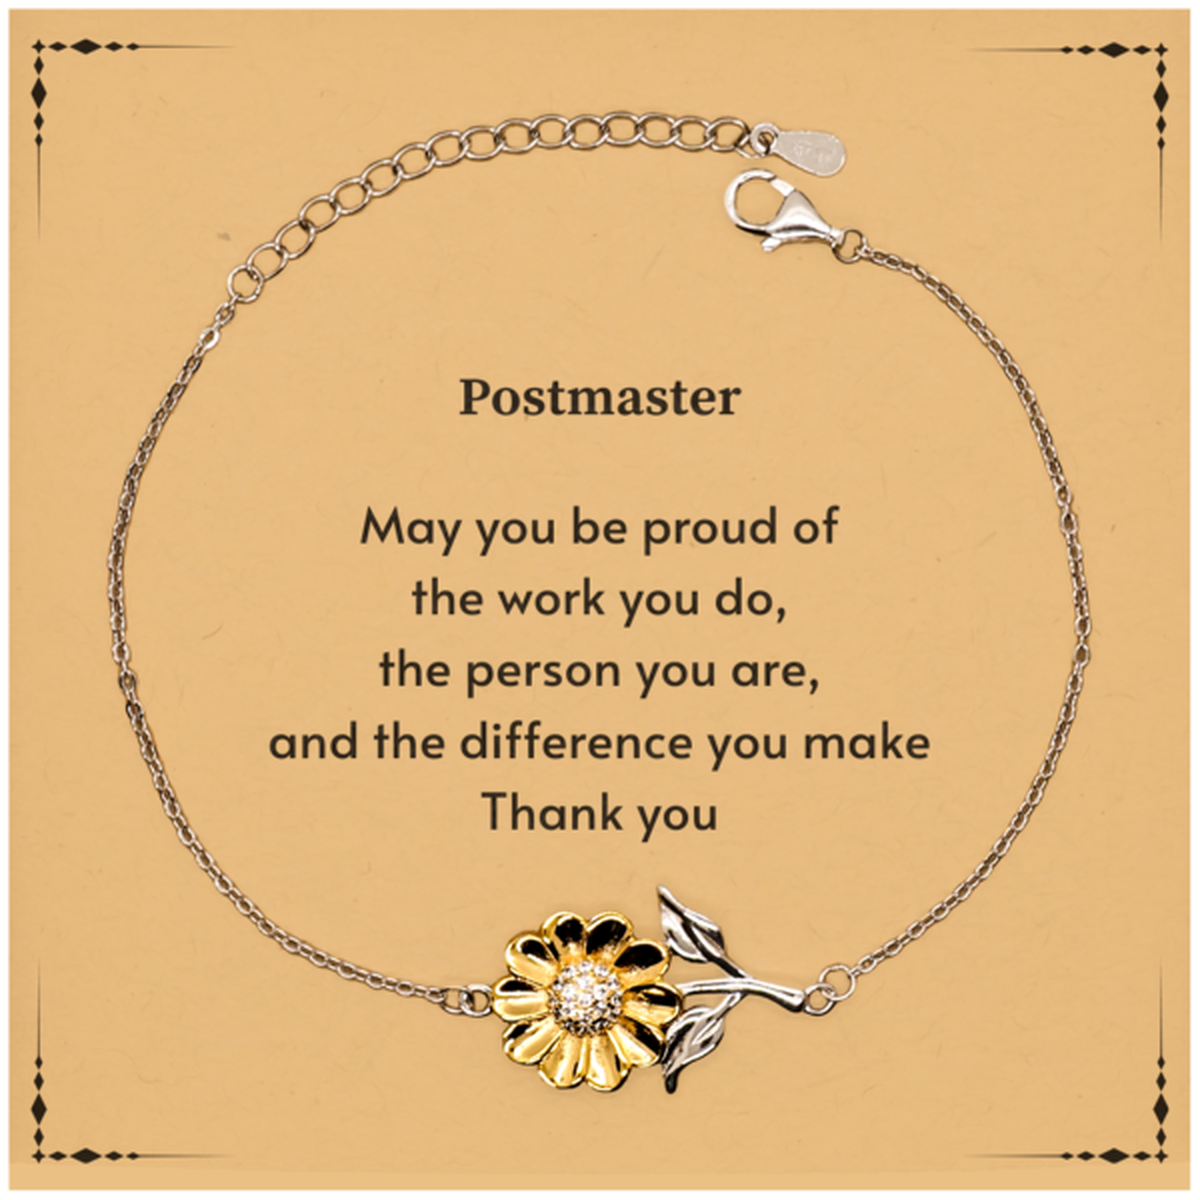 Heartwarming Sunflower Bracelet Retirement Coworkers Gifts for Postmaster, Postmaster May You be proud of the work you do, the person you are Gifts for Boss Men Women Friends